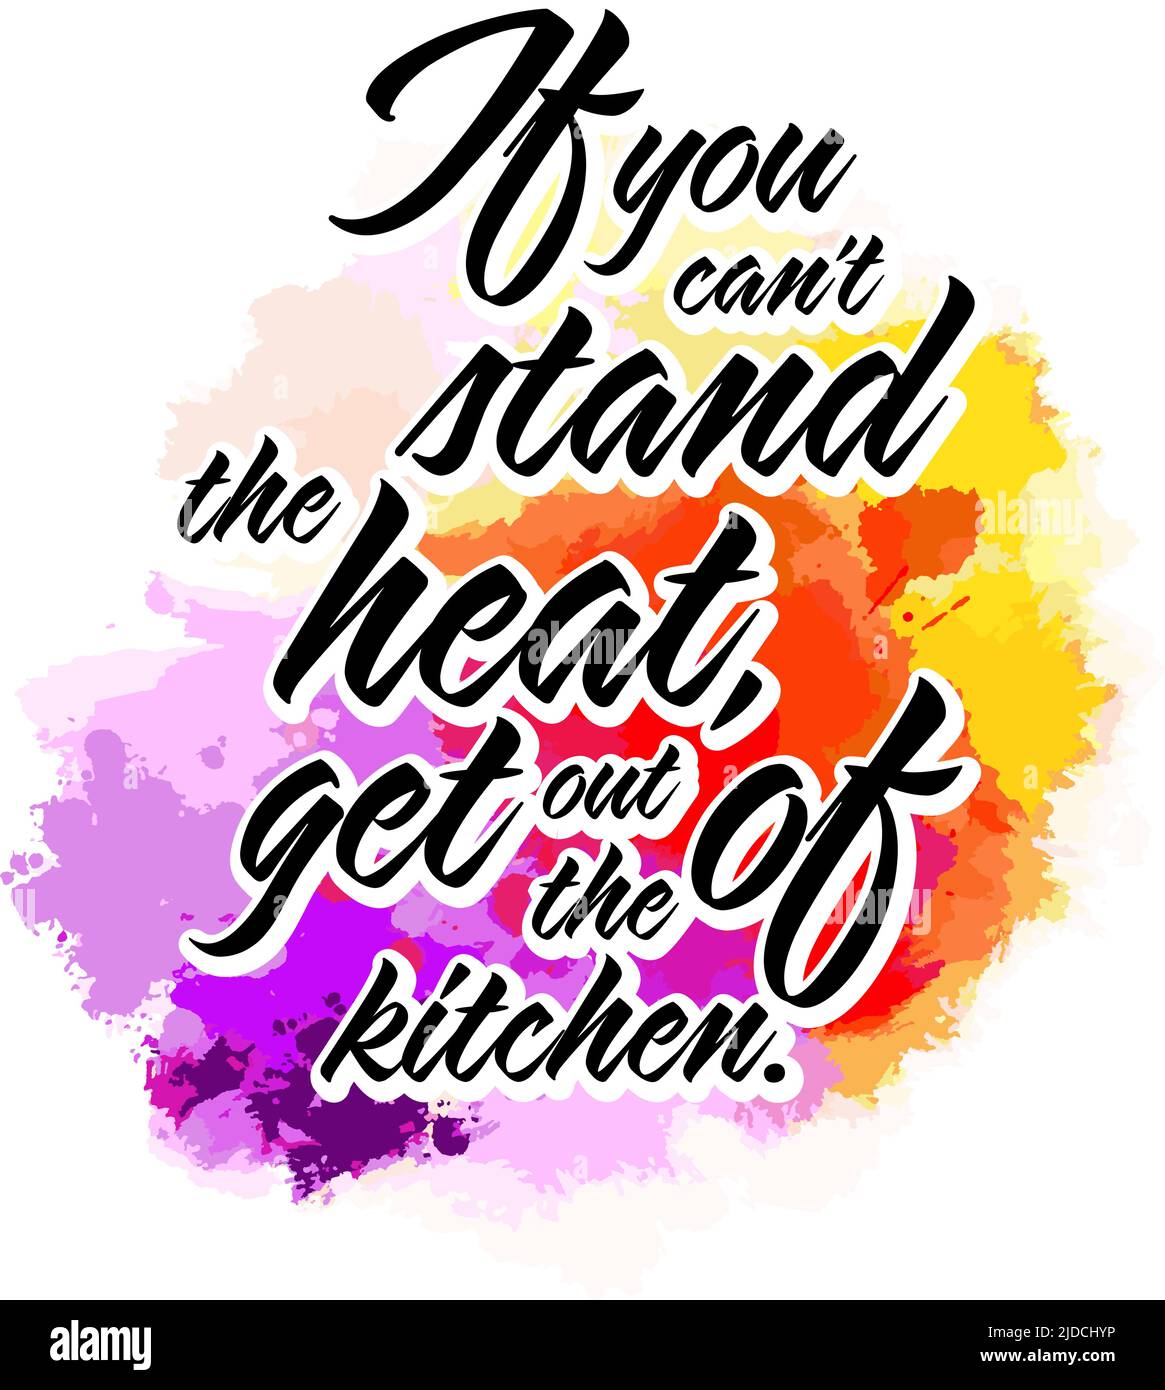 If You Cant Stand The Heat, Get Out Of The Kitchen. Lettering Design Vector art for print design. Stock Vector